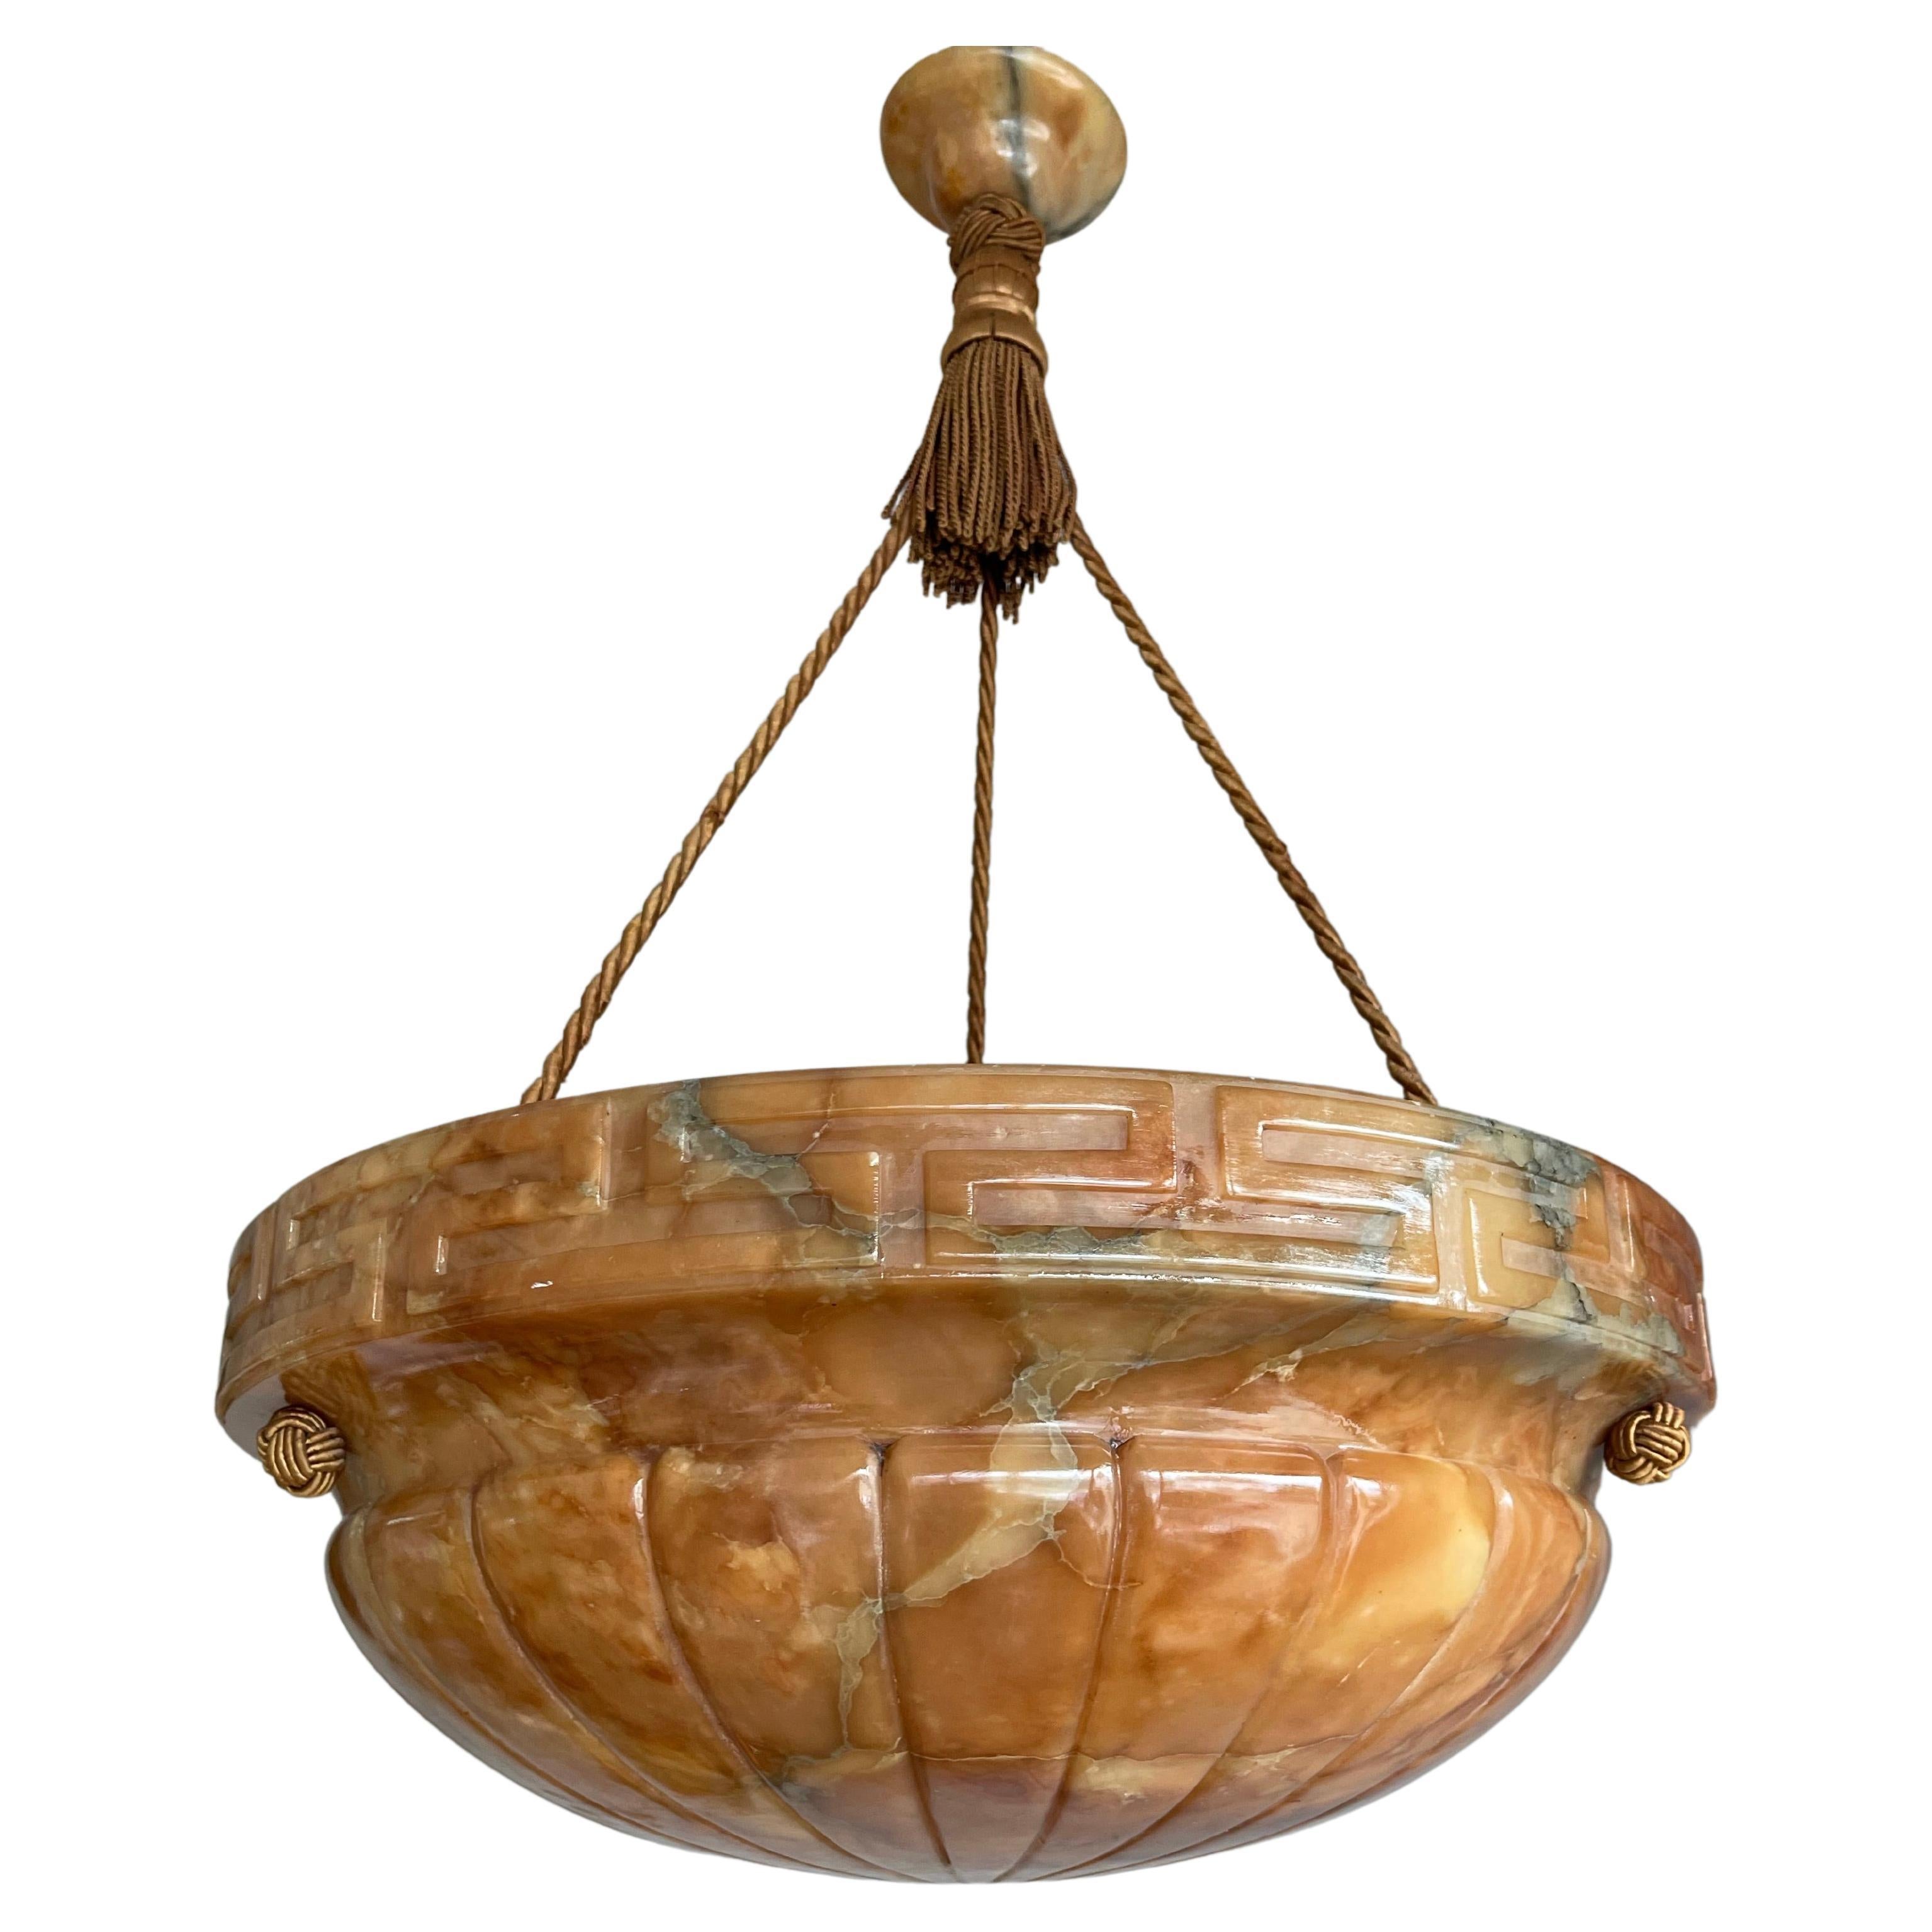 Beautiful design and wonderful light creating, mother nature mineral stone shade plaffonier ceiling light.

This marvelous and top quality carved, early 20th century alabaster pendant is hanging from the original alabaster canopy and perfectly